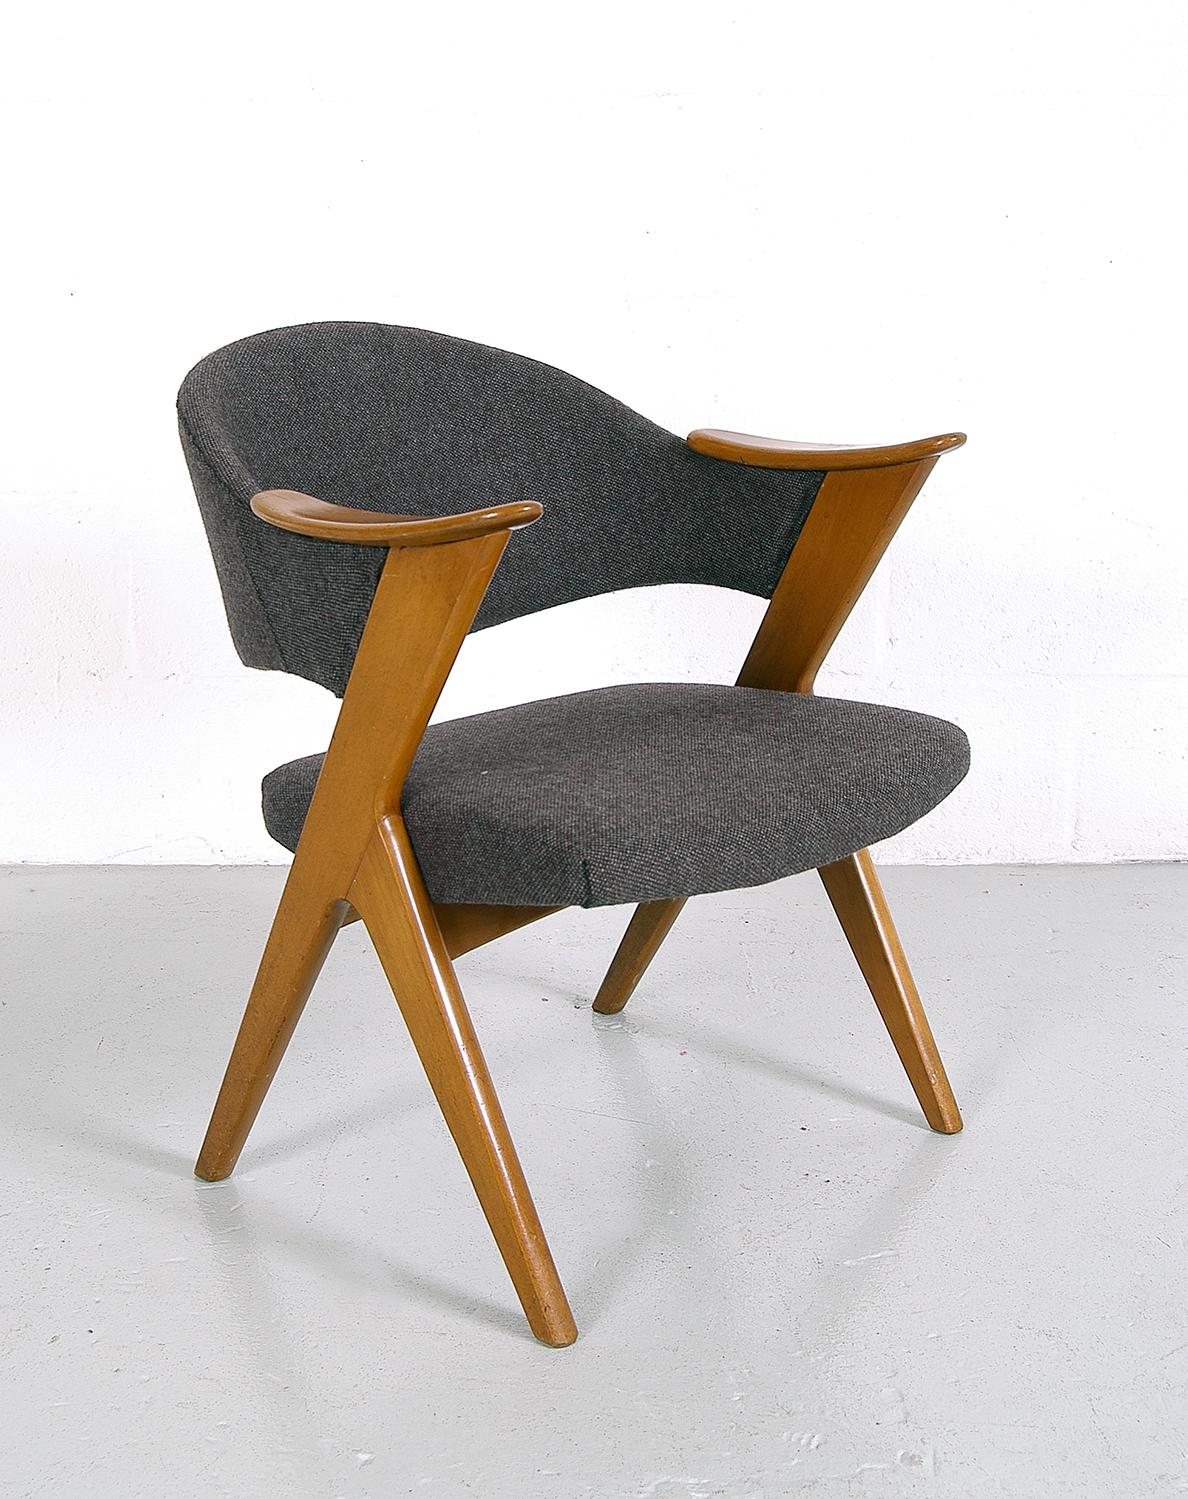 The ‘Blinken’ desk chair was designed in the early 1950s by Rolf Rastad and Adolf Relling for Hjellegjerde Mobler of Norway. It's very comfortable and in really nice condition, the grey woolen tweed upholstery looks to be relatively recent, as it is